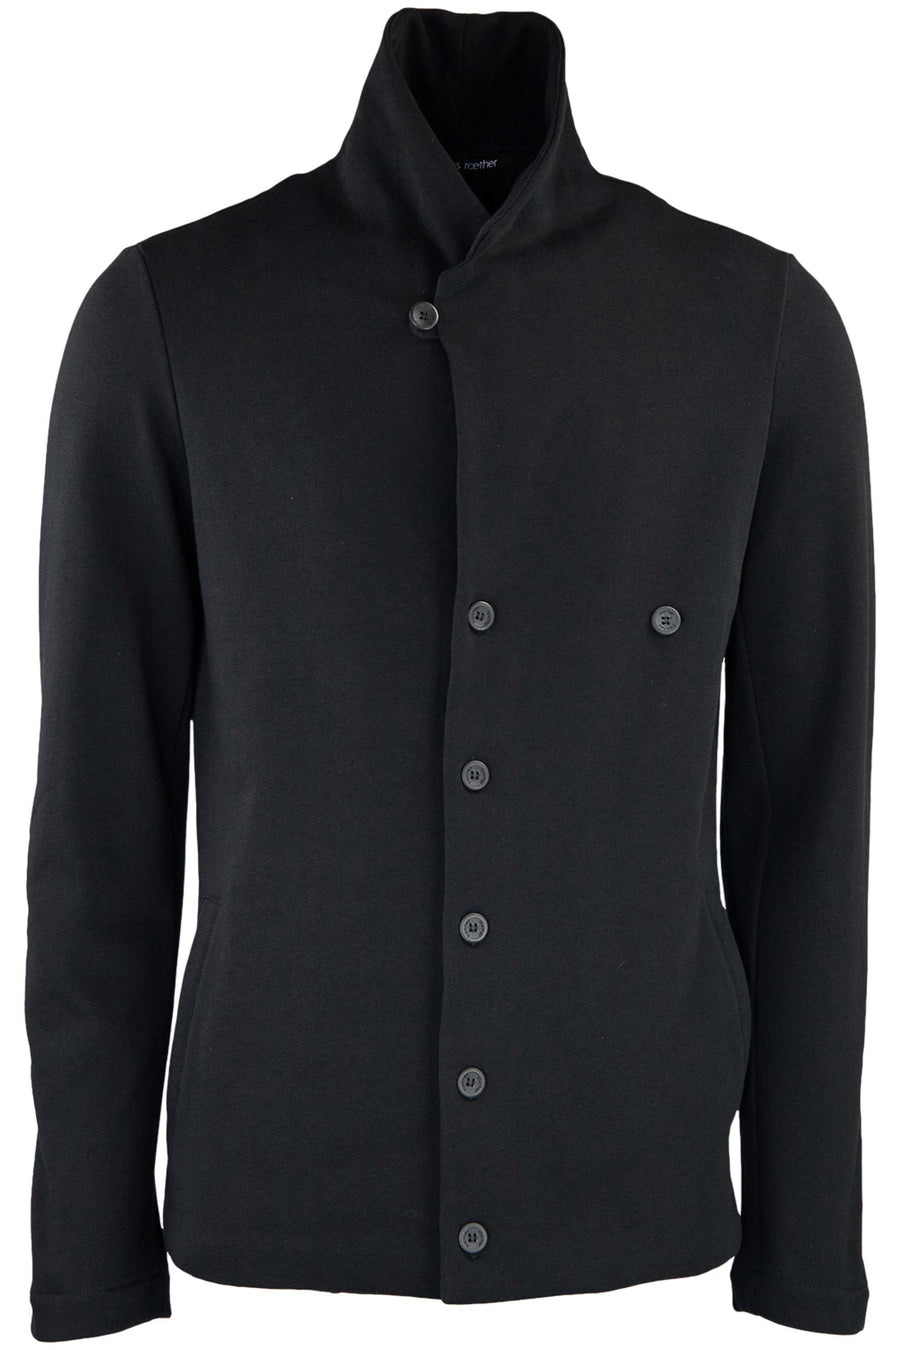 Buy the Hannes Roether Relaxed Fit Jersey Cotton Jacket in Black at Intro. Spend £50 for free UK delivery. Official stockists. We ship worldwide.